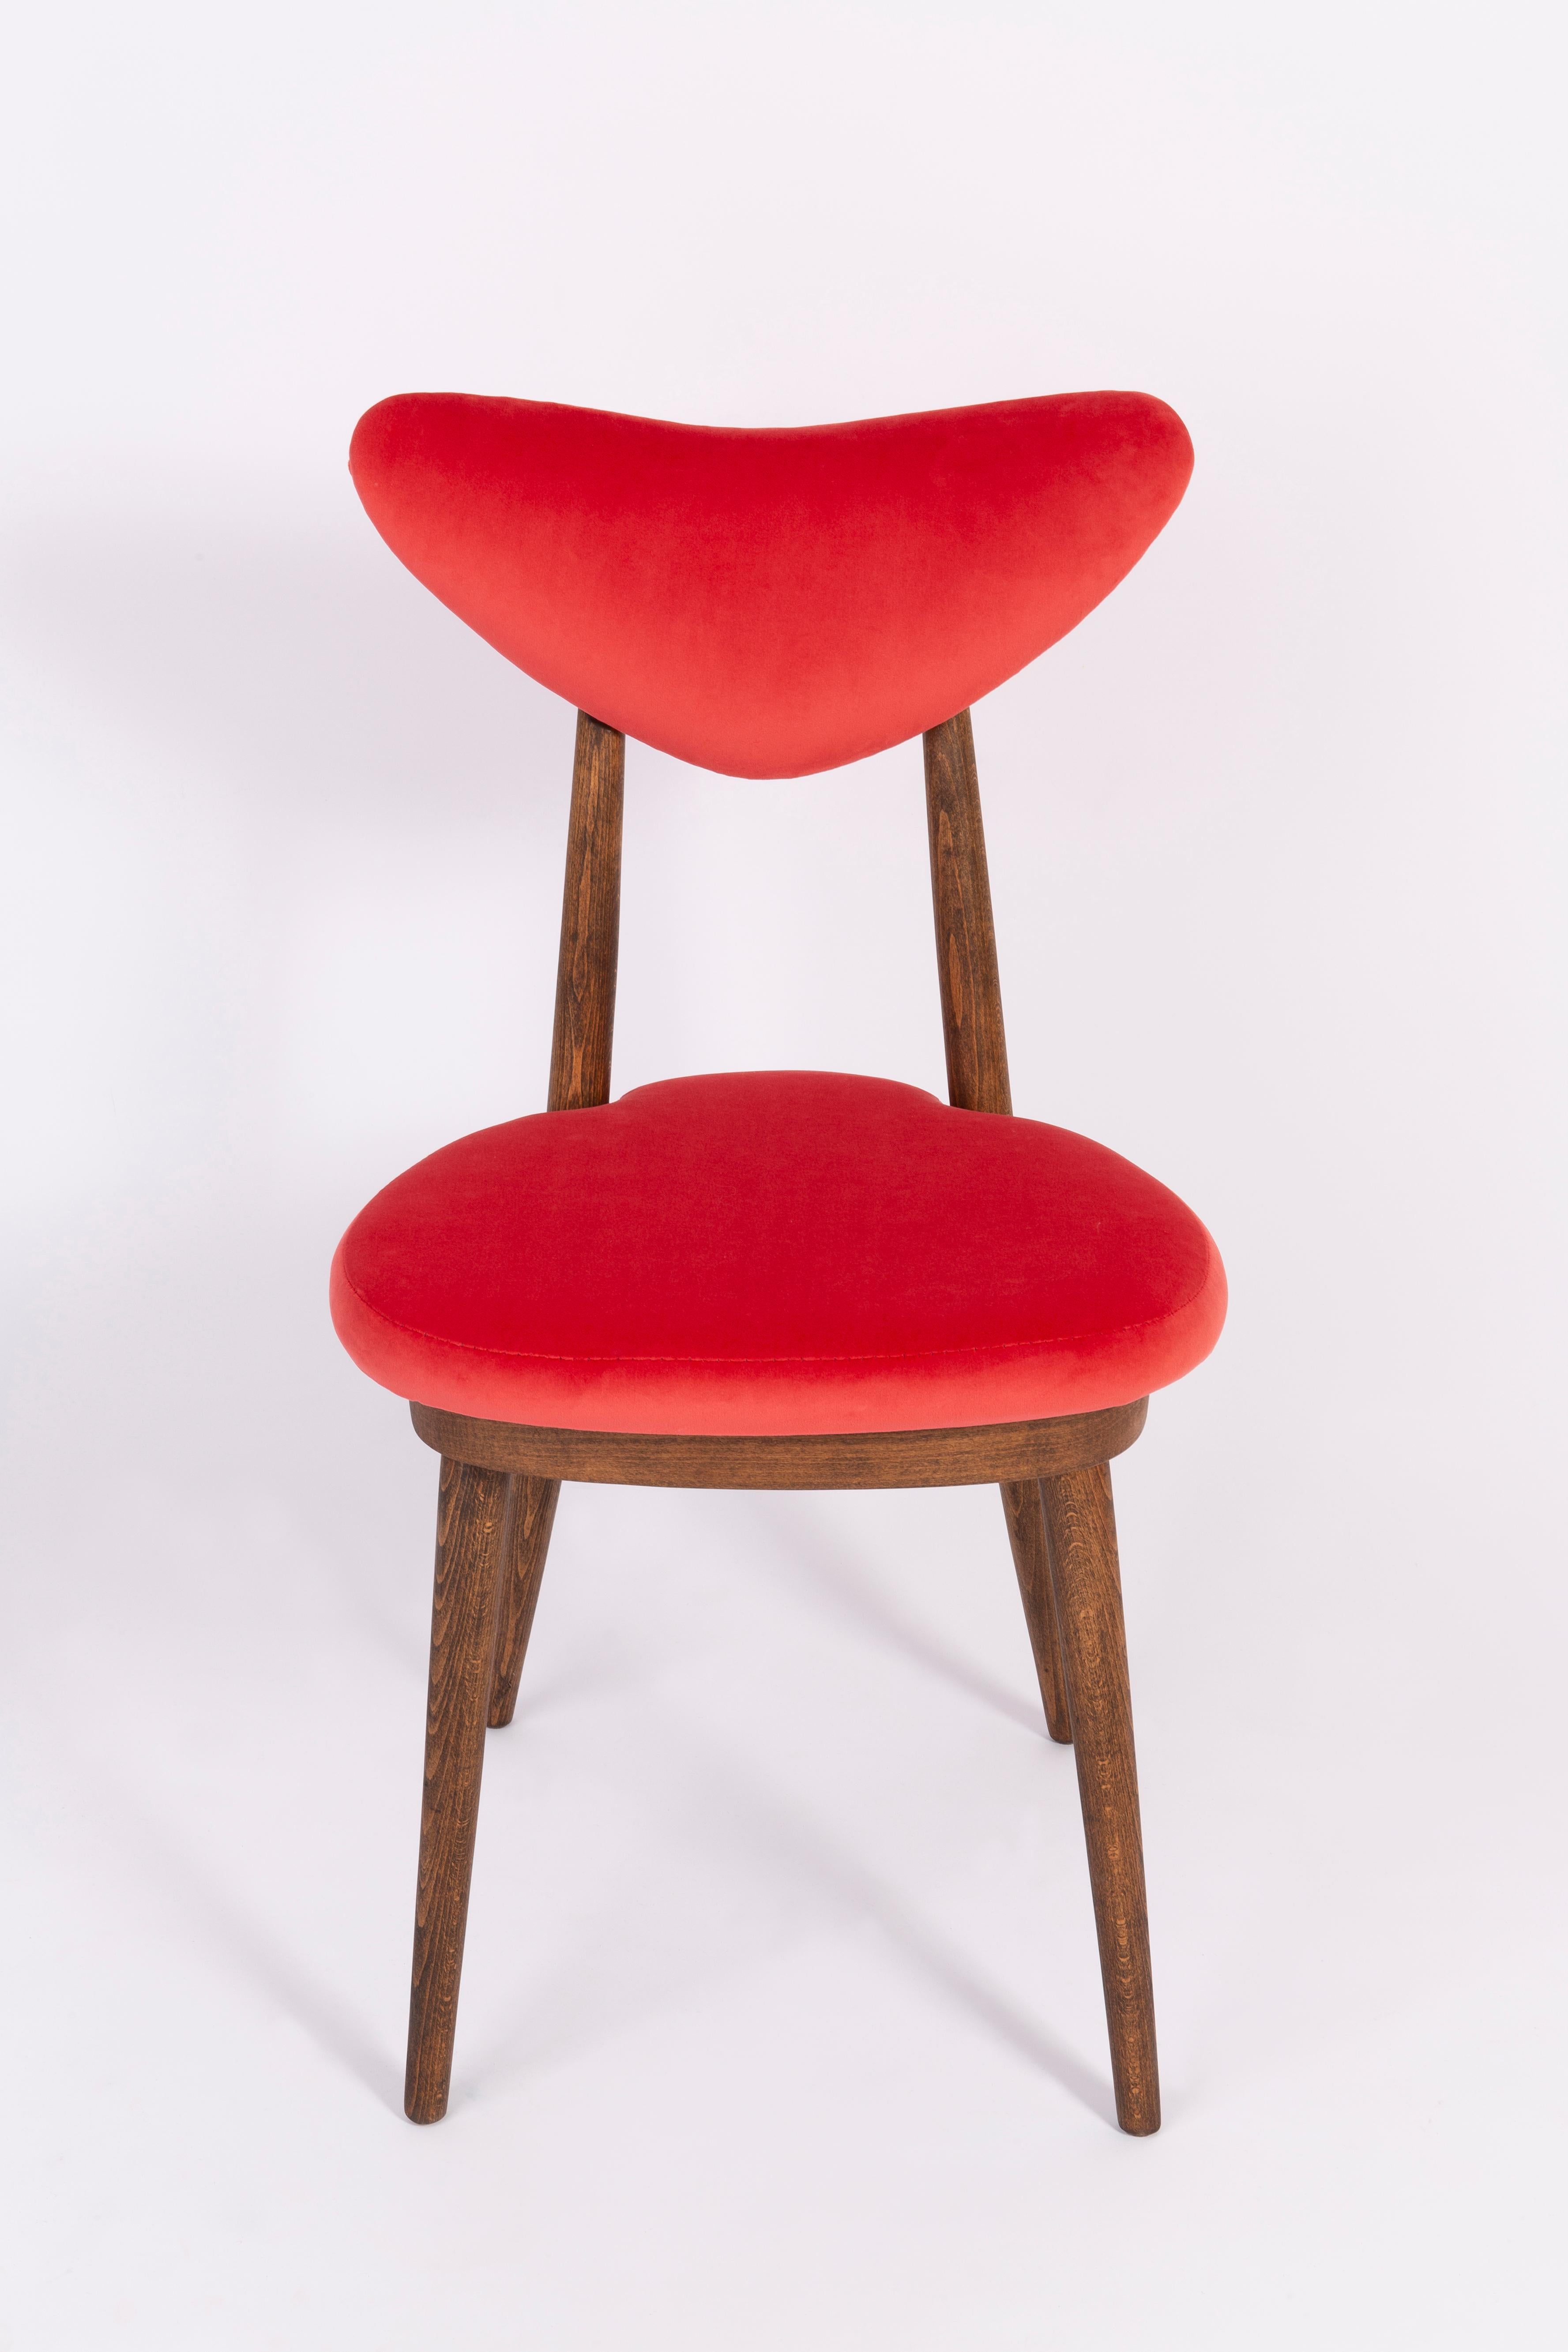 Set of Four Red Heart Chairs, Poland, 1960s For Sale 7